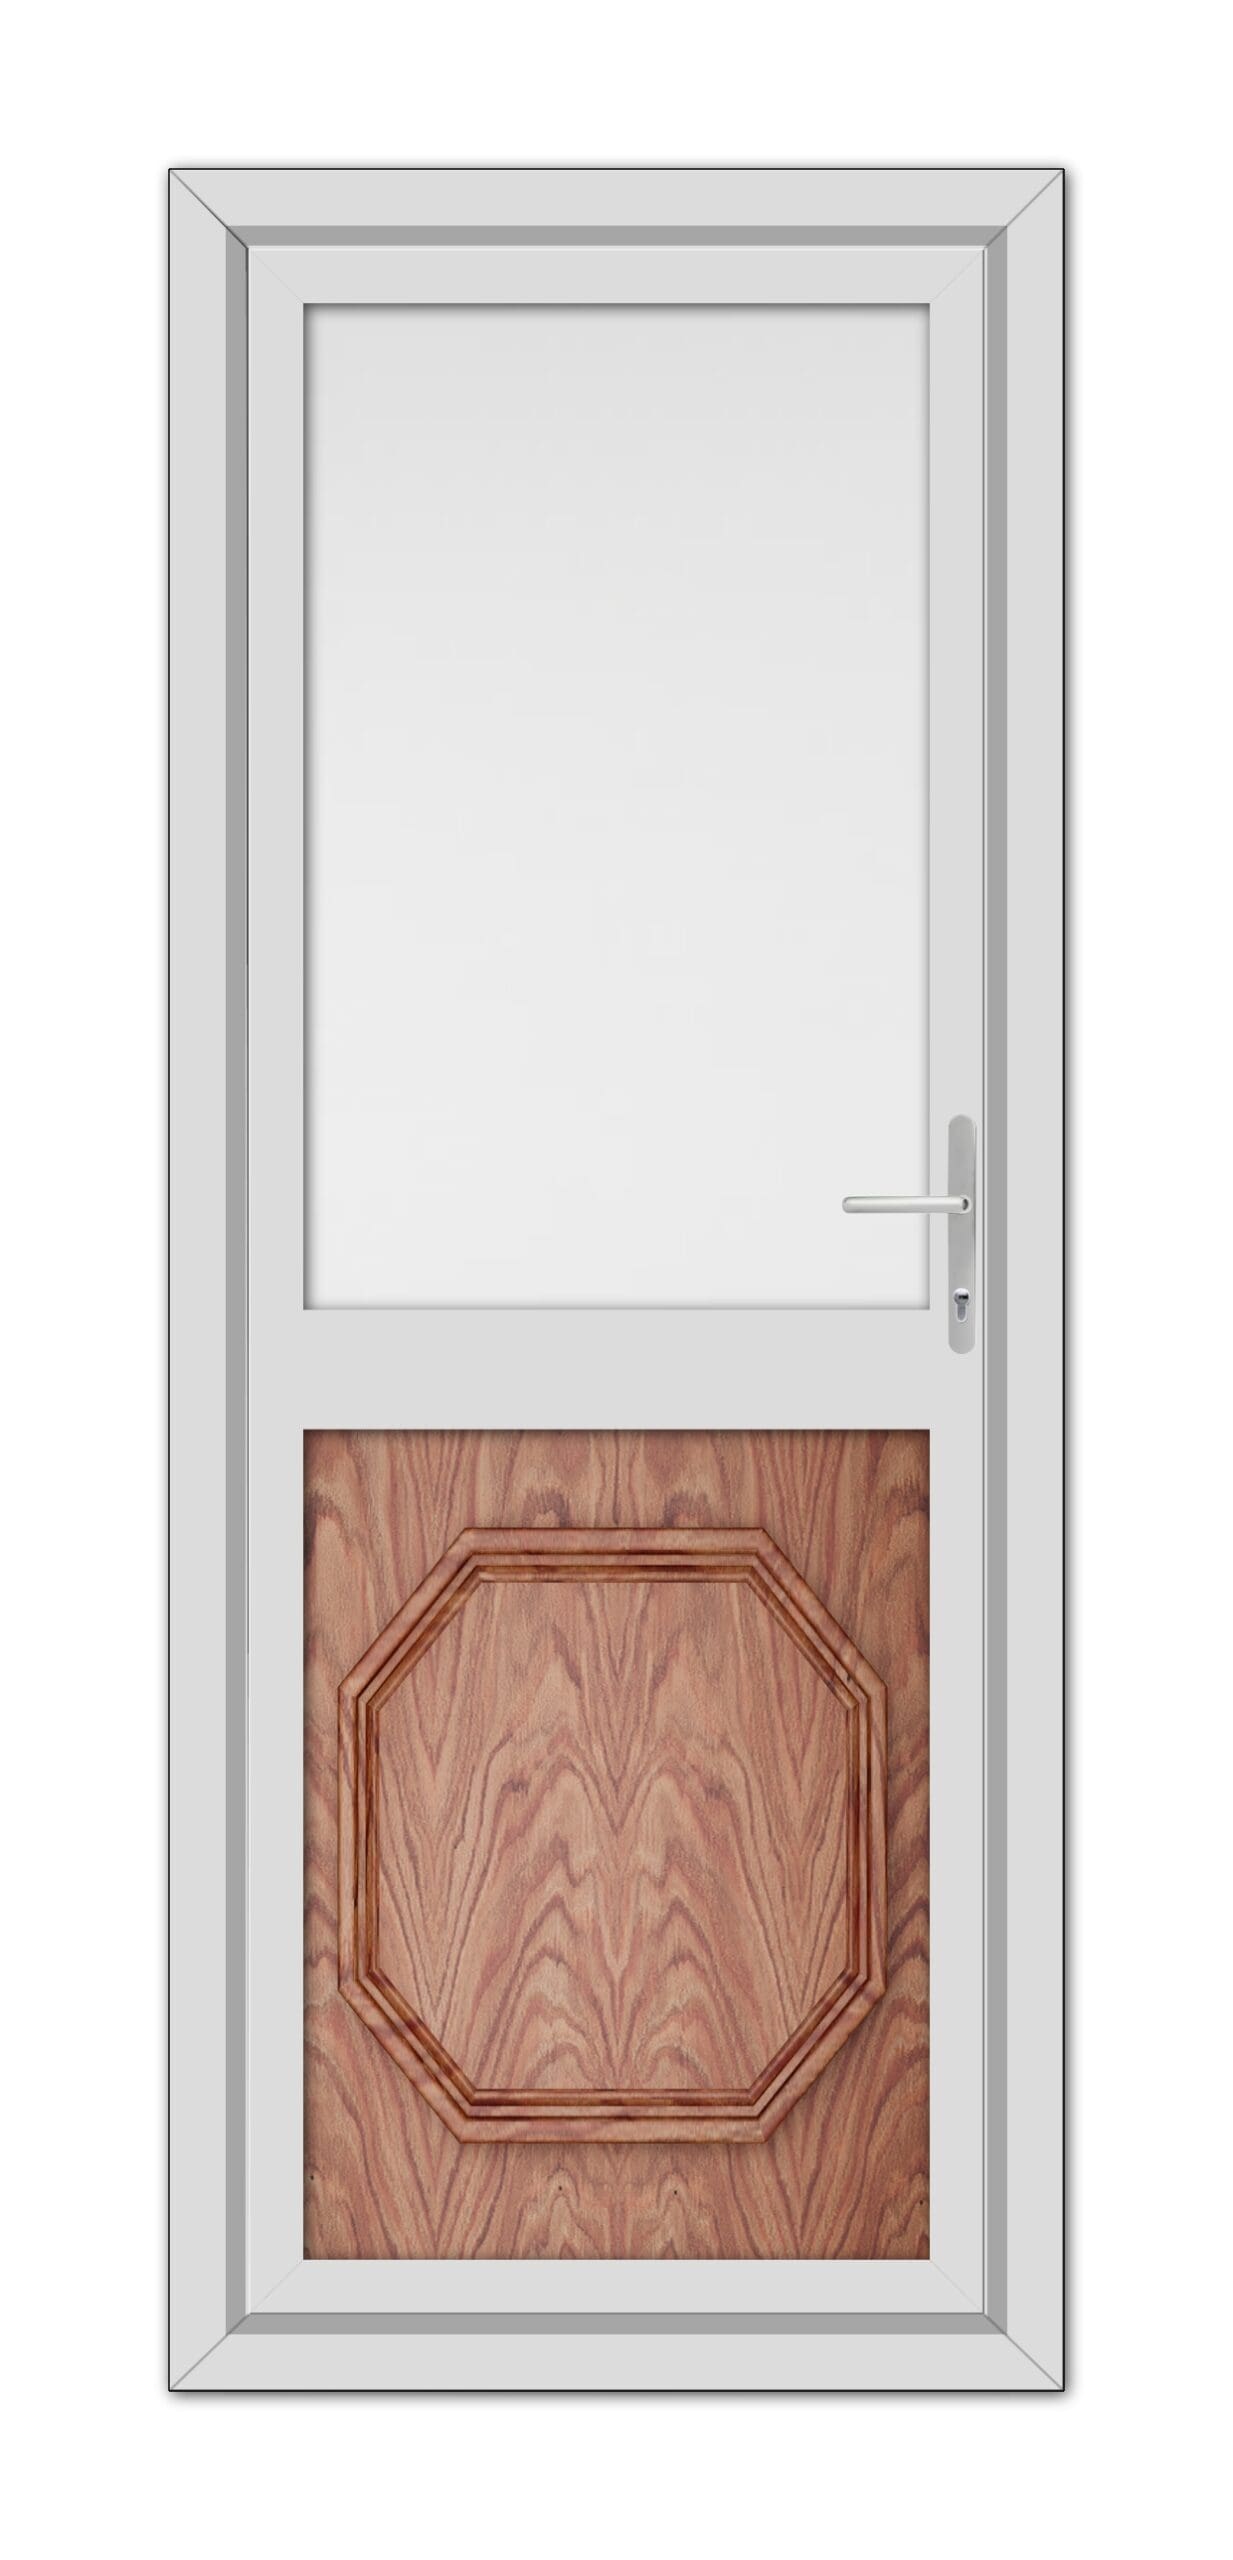 A closed white Solid Oak Buckingham Half uPVC Back Door with a rectangular translucent panel and an ornate wooden insert in the middle, featuring a handle on the right side.